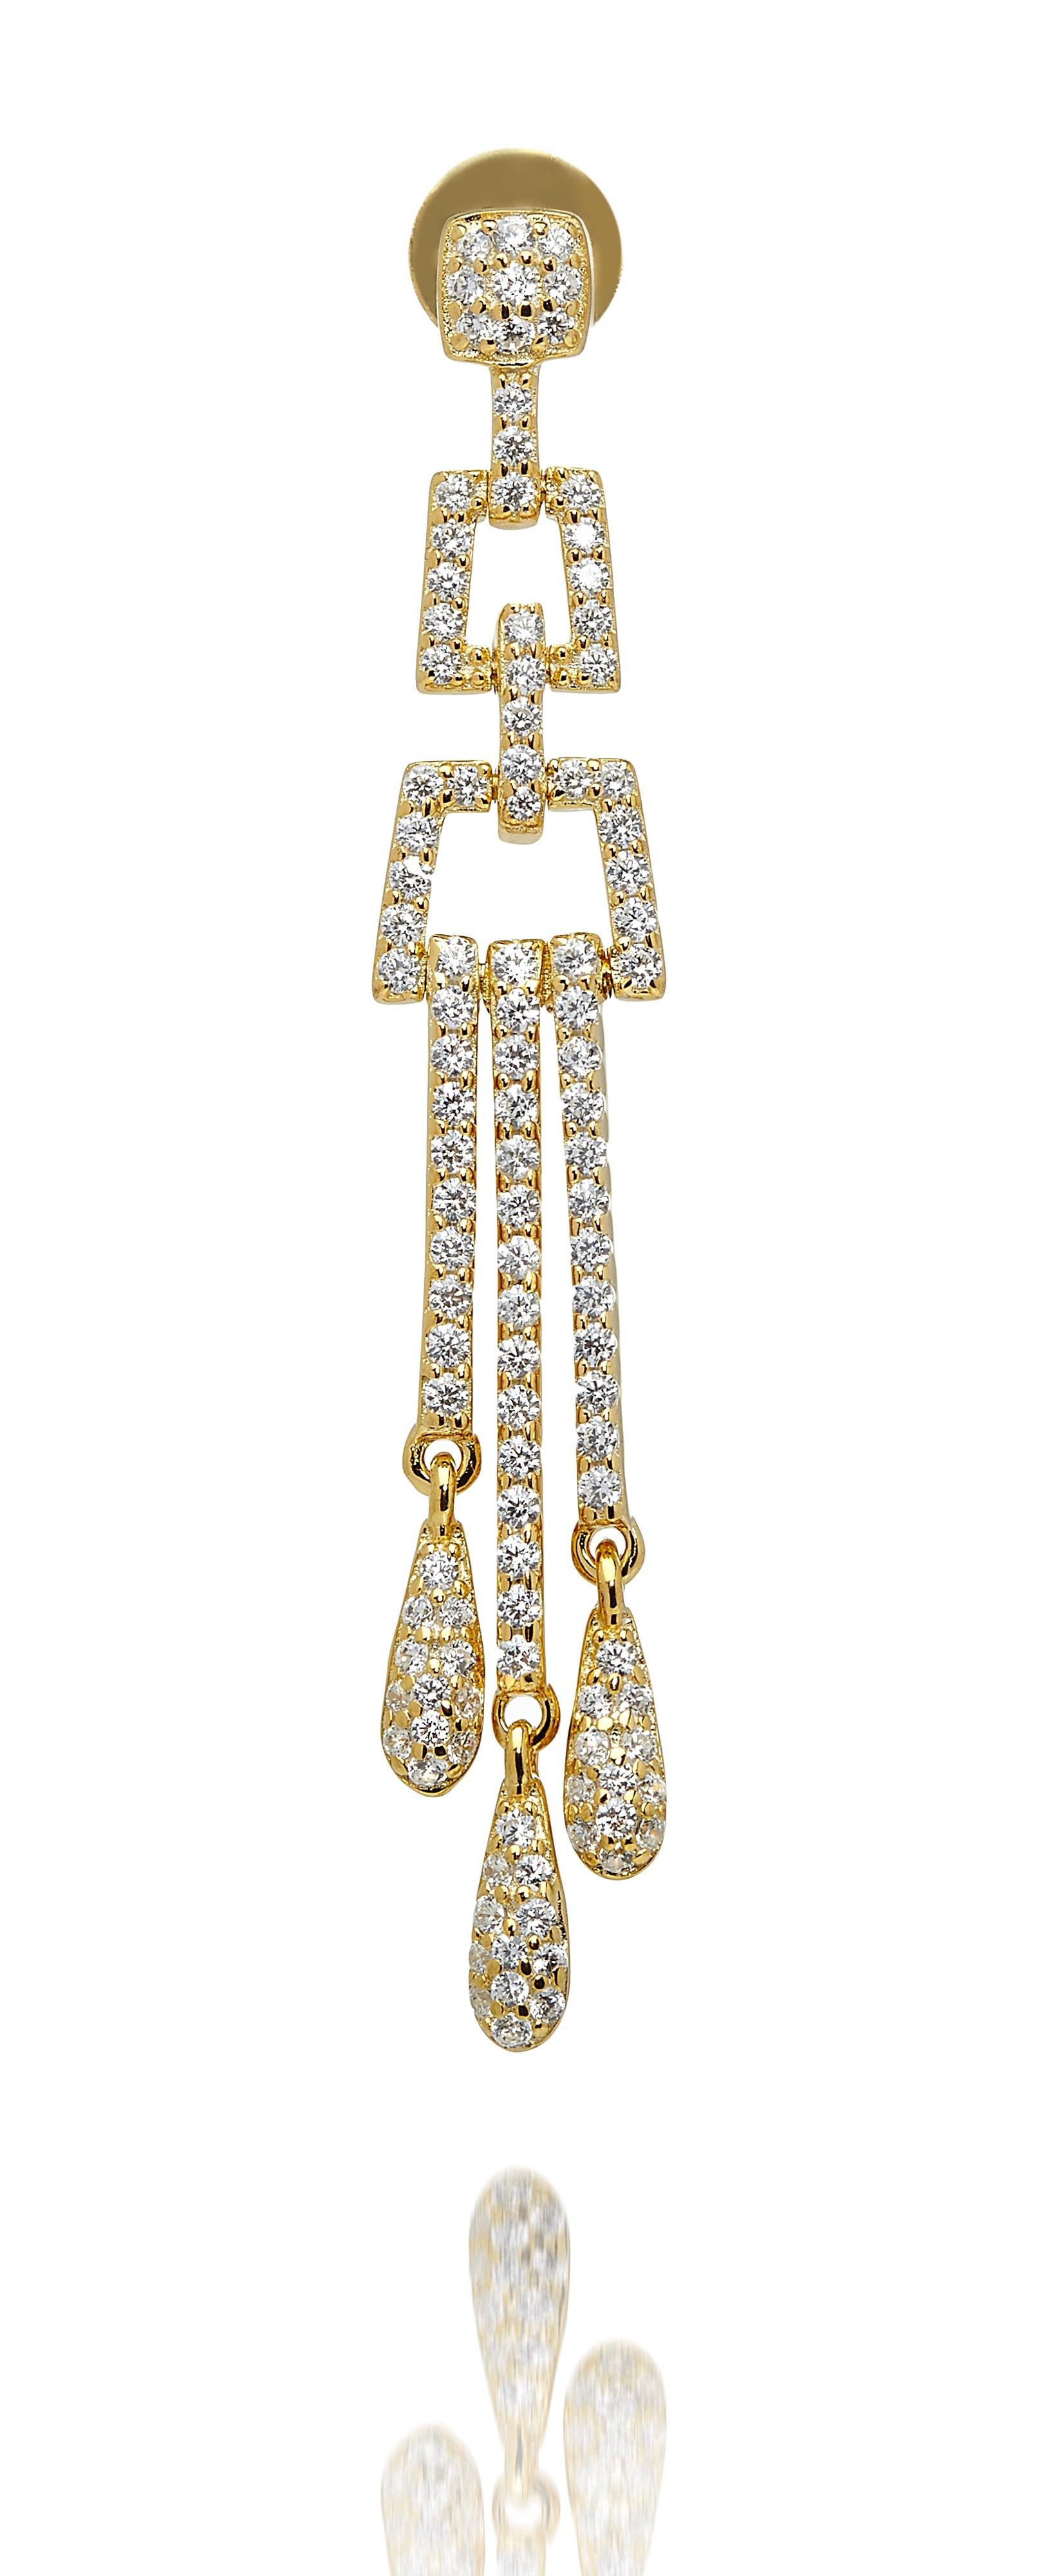 Art Deco Style Sterling Silver Hand Finished 2.6 Carat Cubic Zirconia 14 Karat Yellow Gold Plated Chandelier Drop Earrings

Inspired by the geometric designs favoured in the Art Deco period, this stunning pair of earrings will transport you to